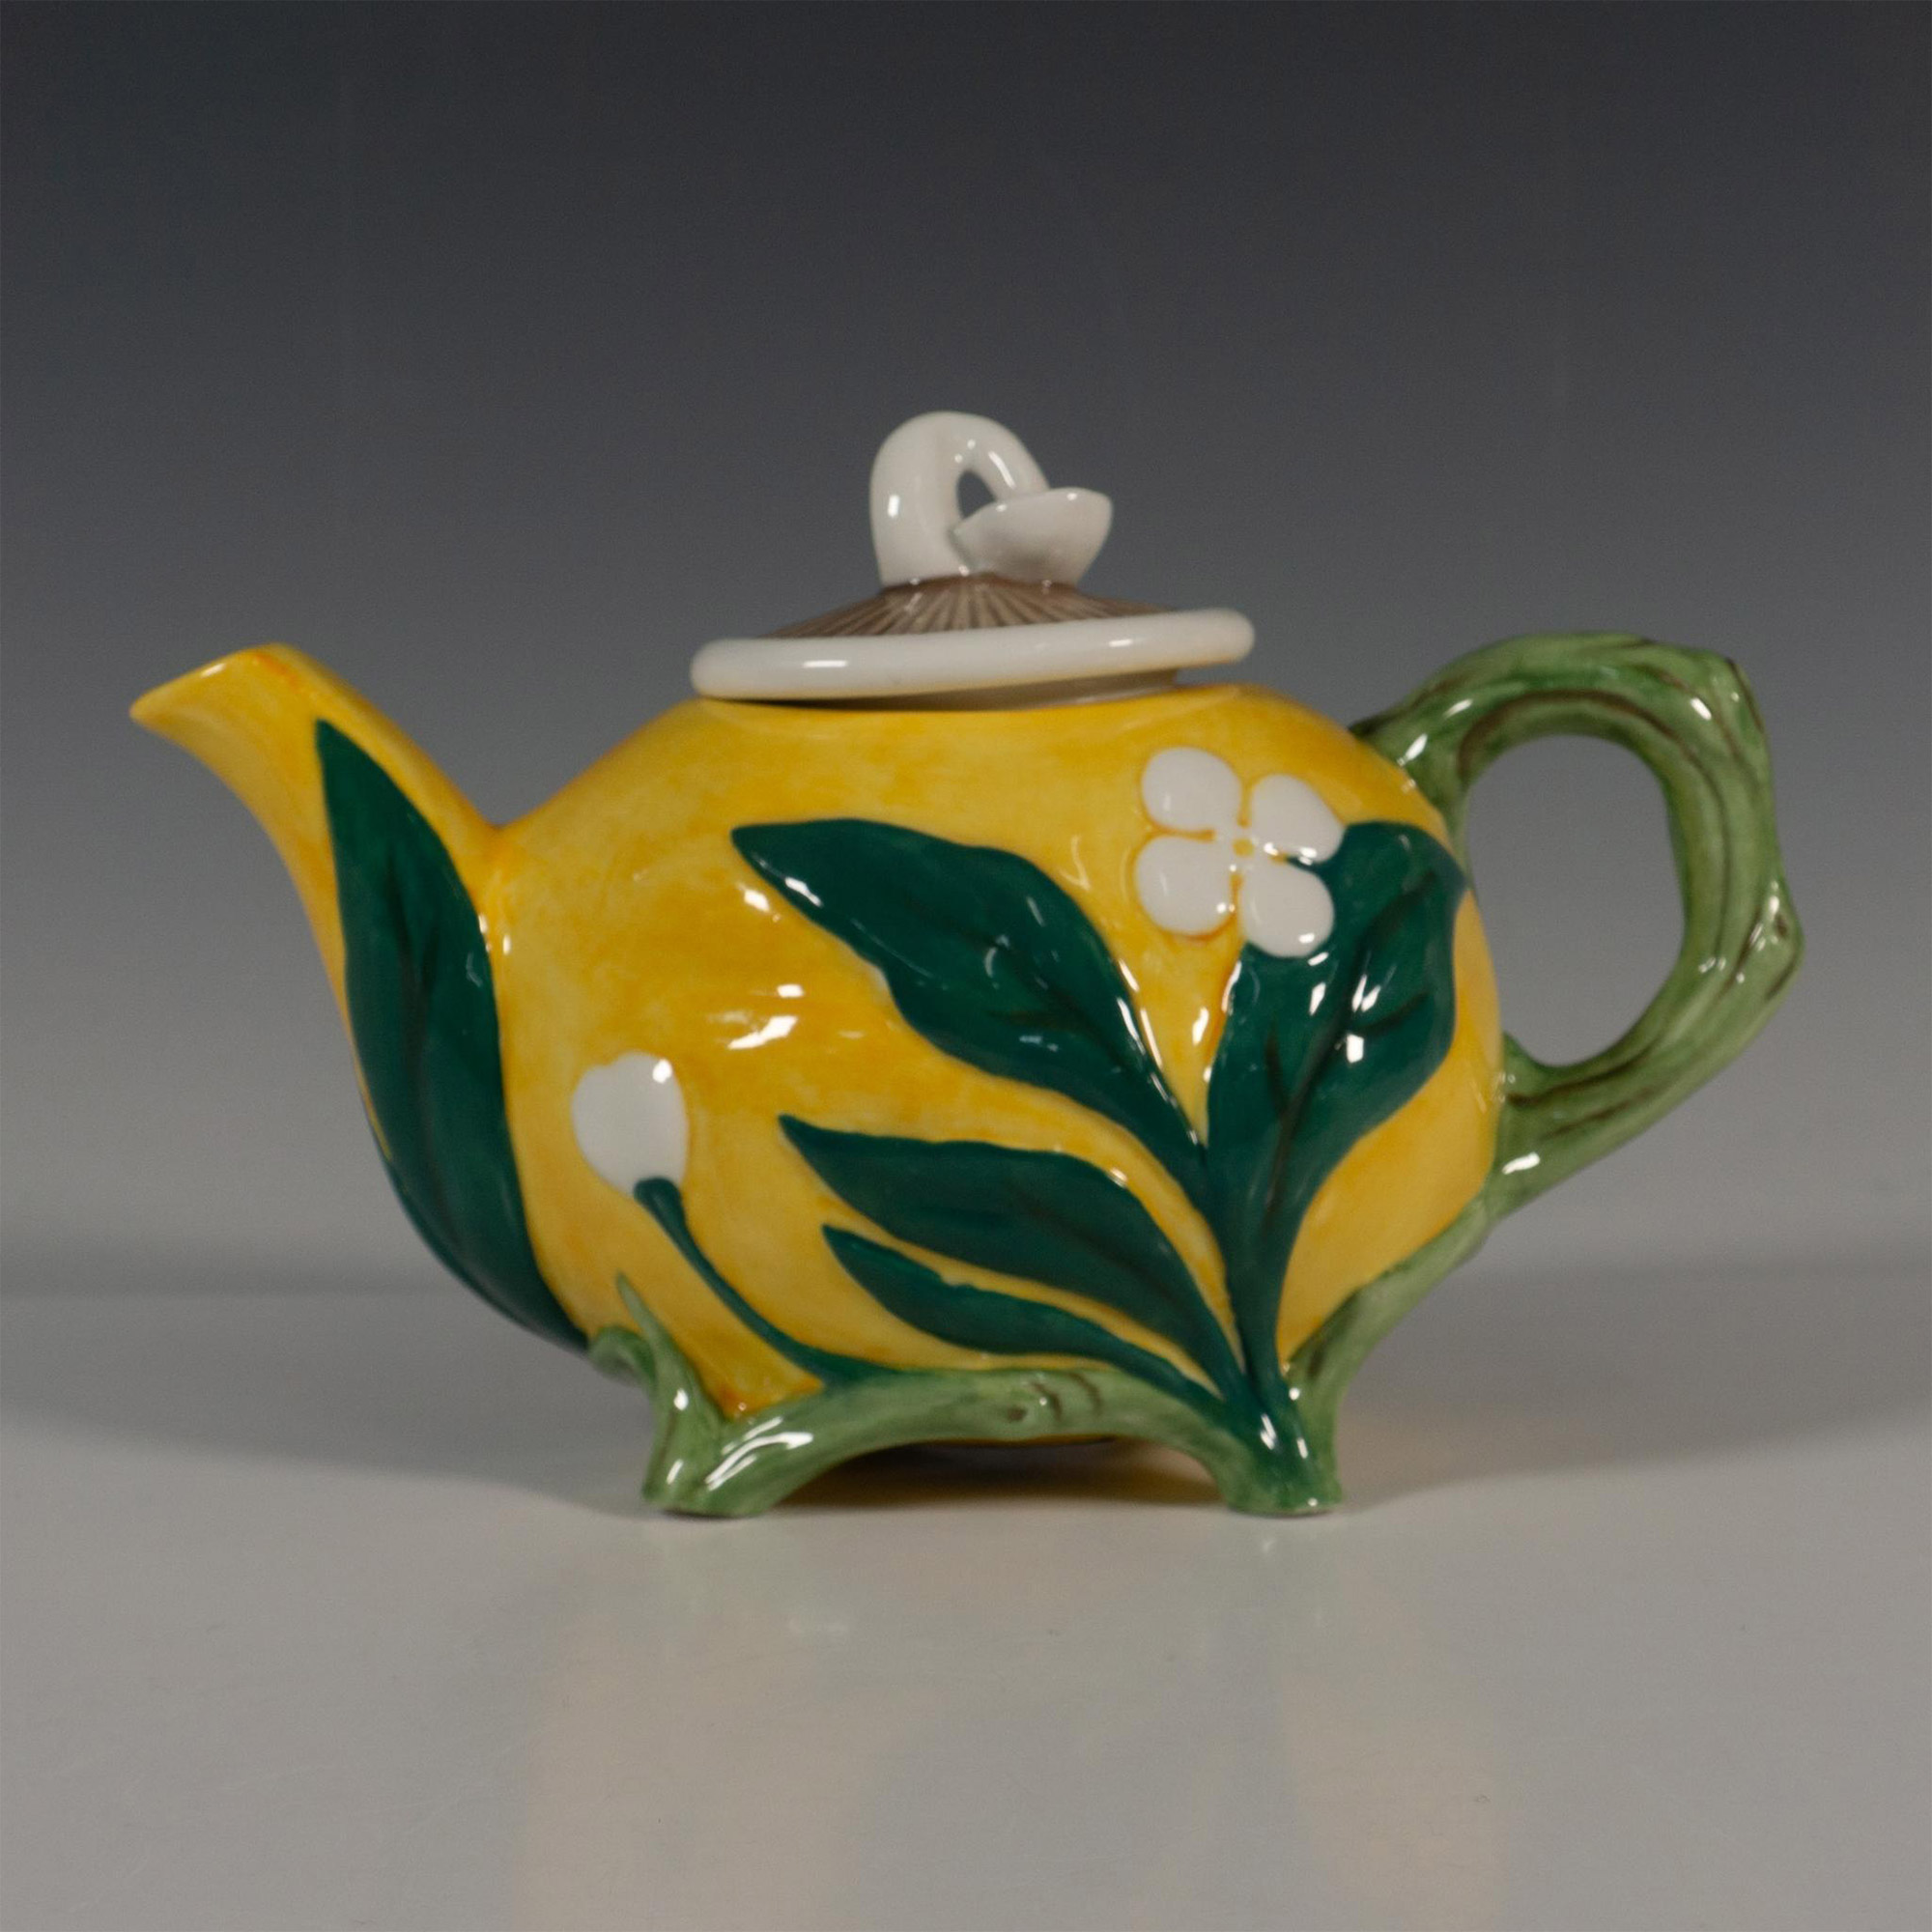 Minton Archive Collection Limited Edition Mushroom Teapot - Image 3 of 5